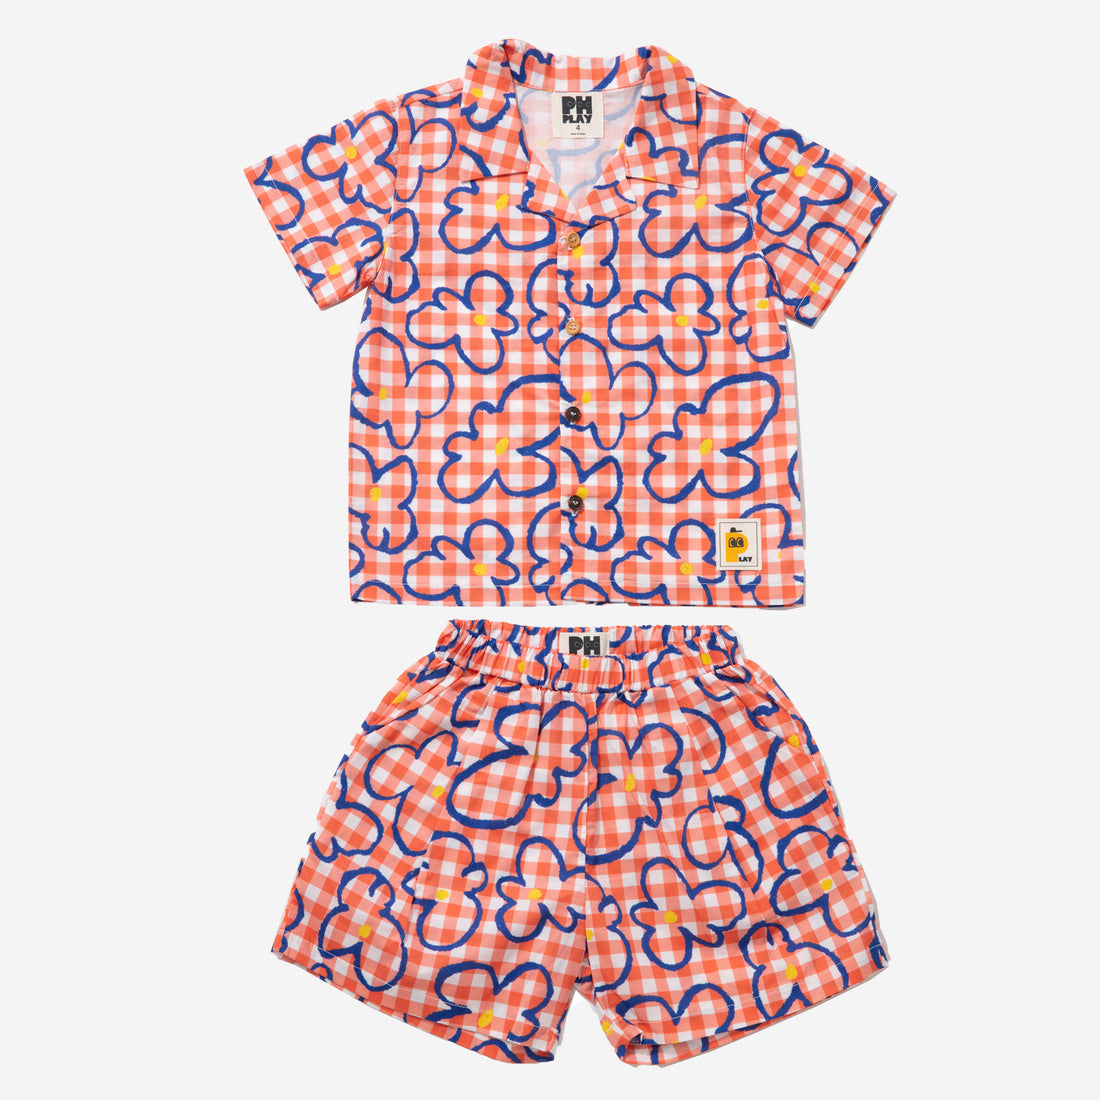 orange checker with blue flowers set includes short sleeves top with buttons on the front and a short 